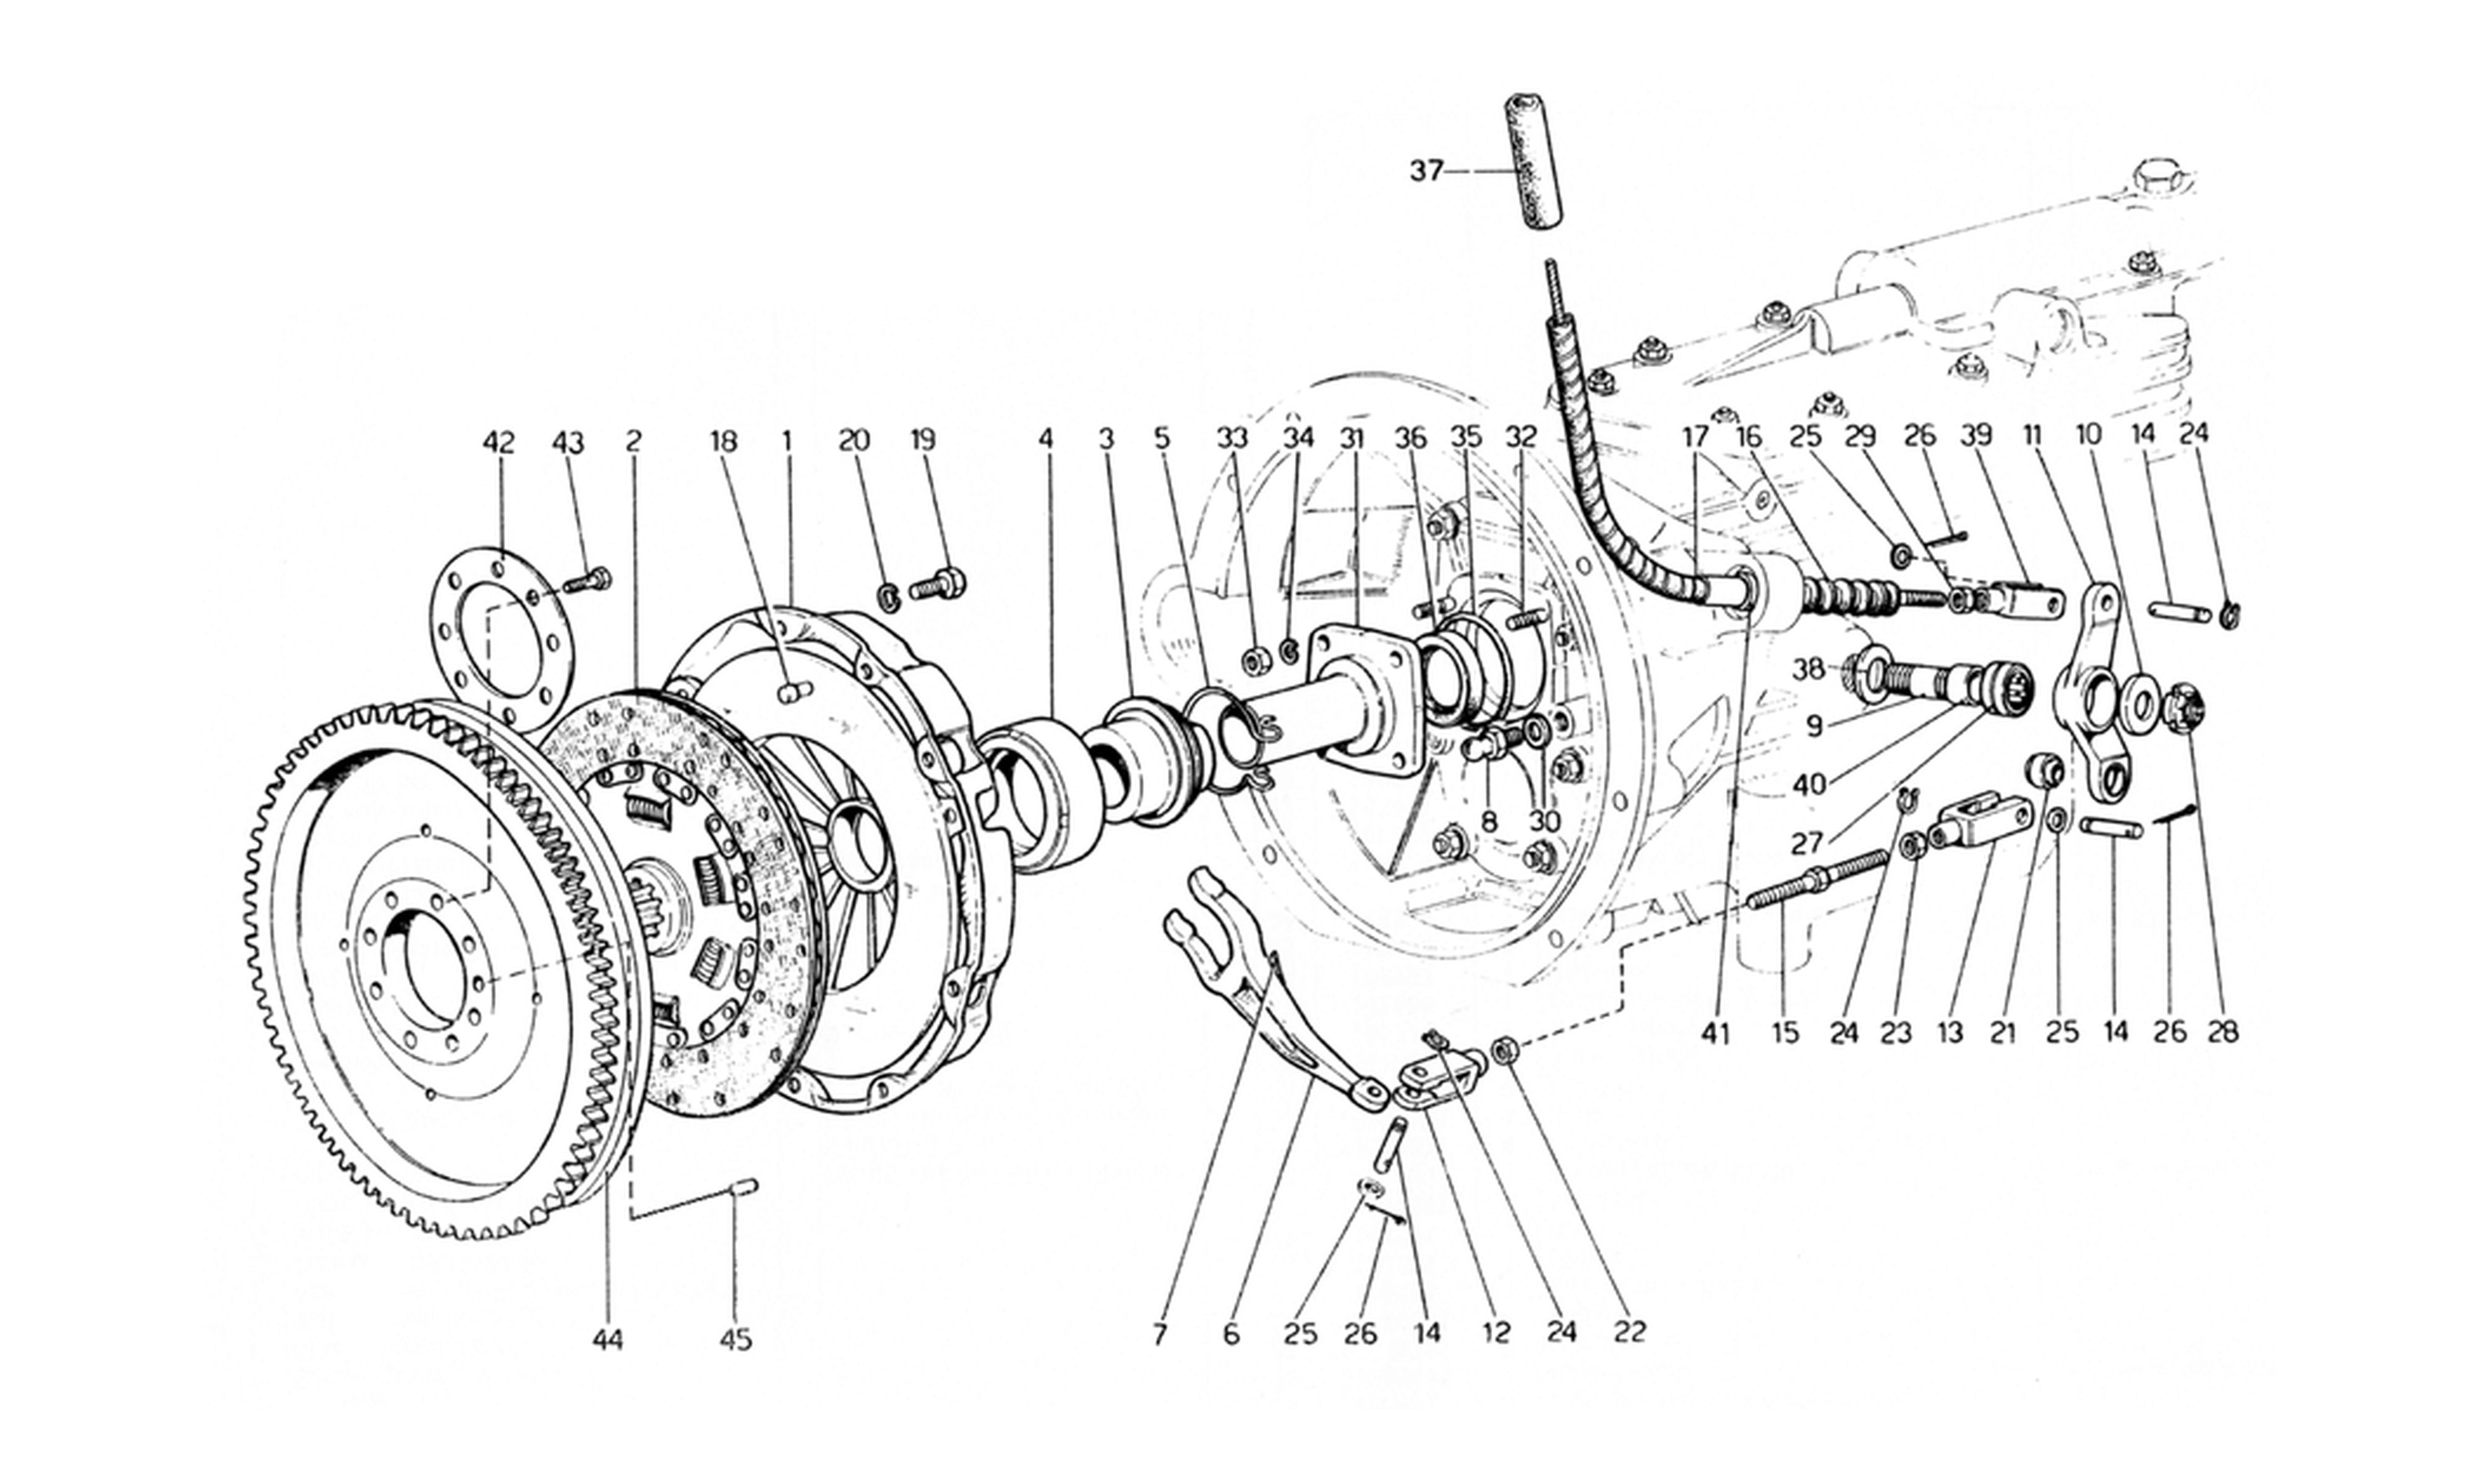 Schematic: Clutch System And Controls (400 Gt)